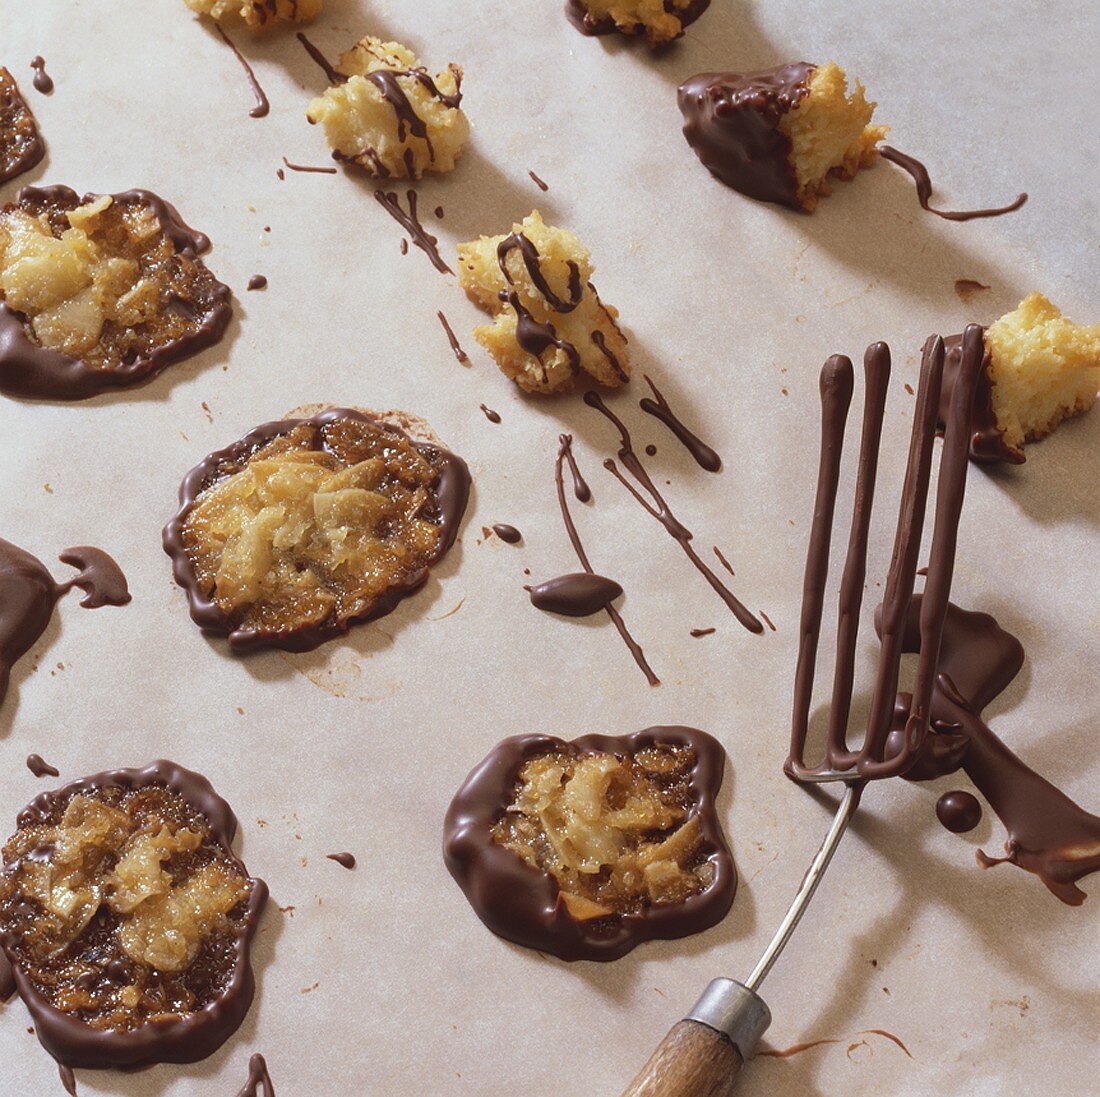 Almond thins & almond & candied peel clusters on baking parchment